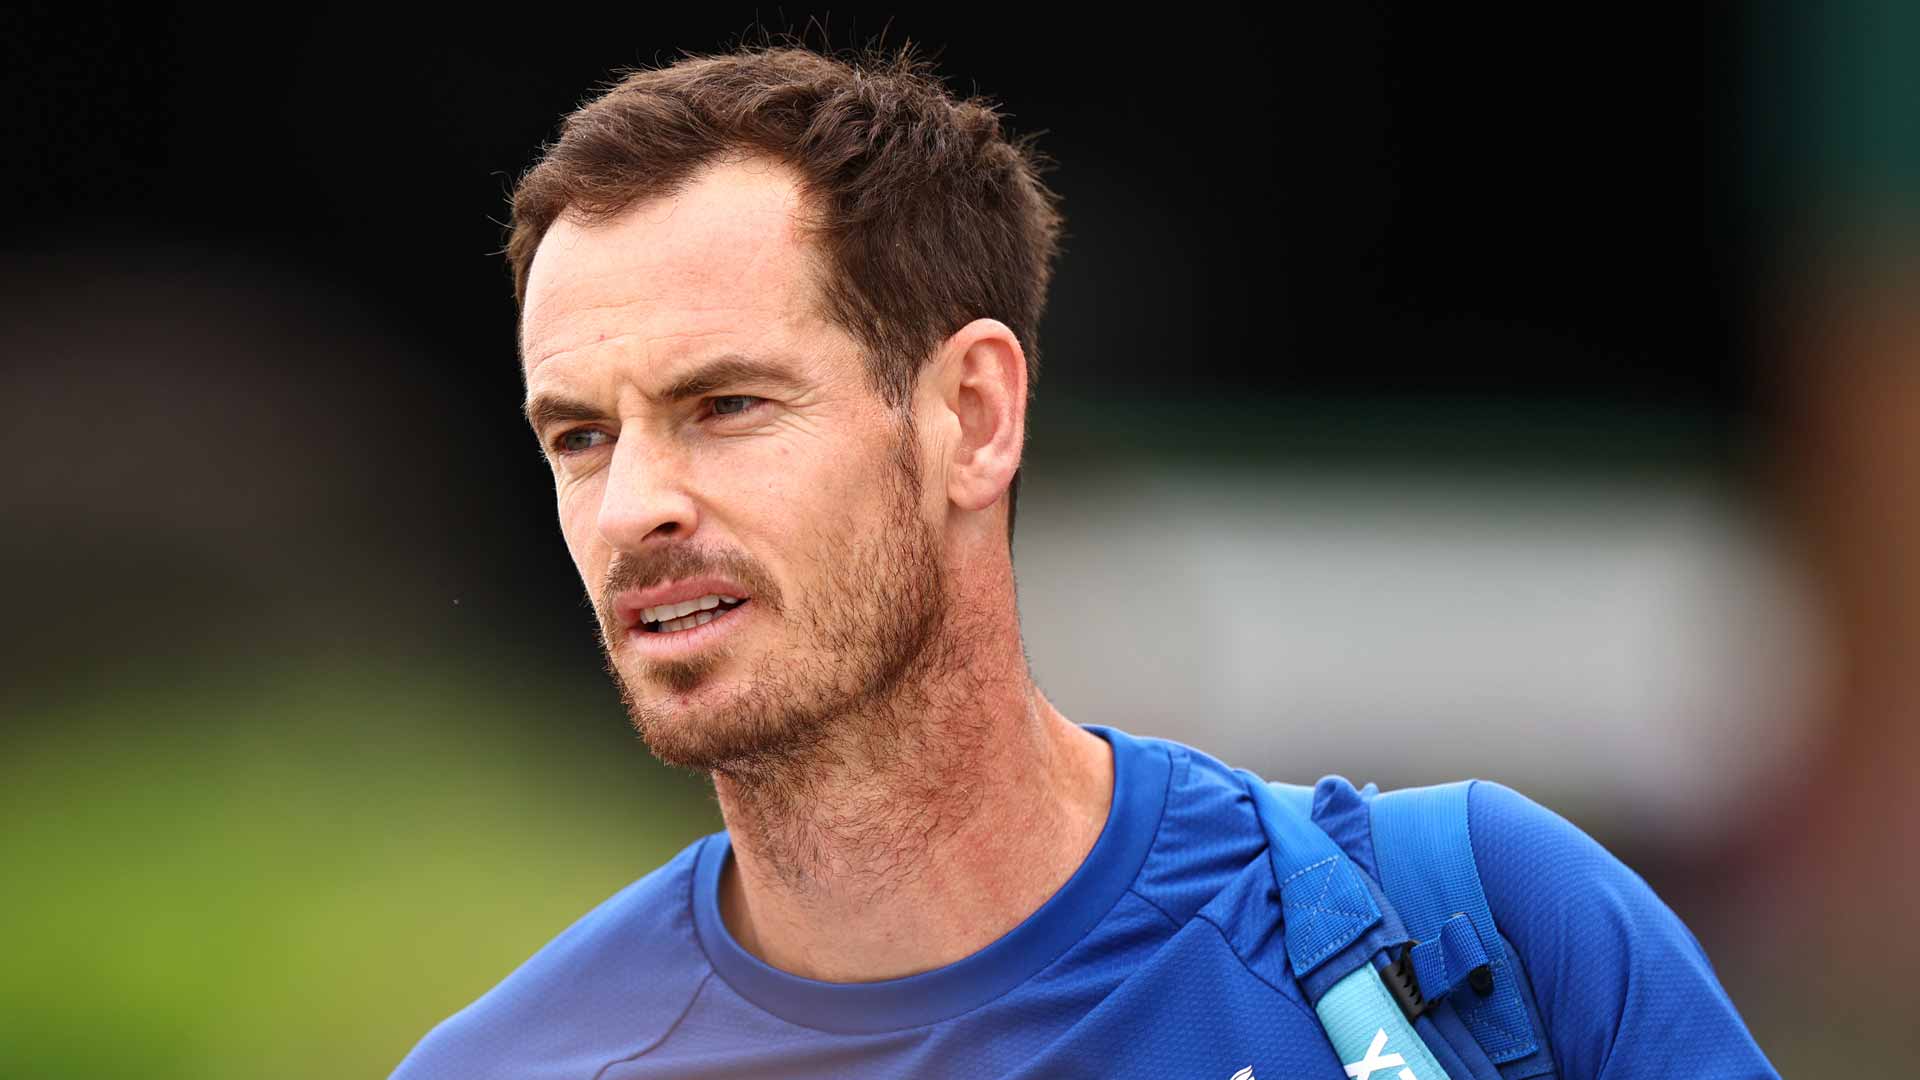 Andy Murray is a two-time Wimbledon champion.